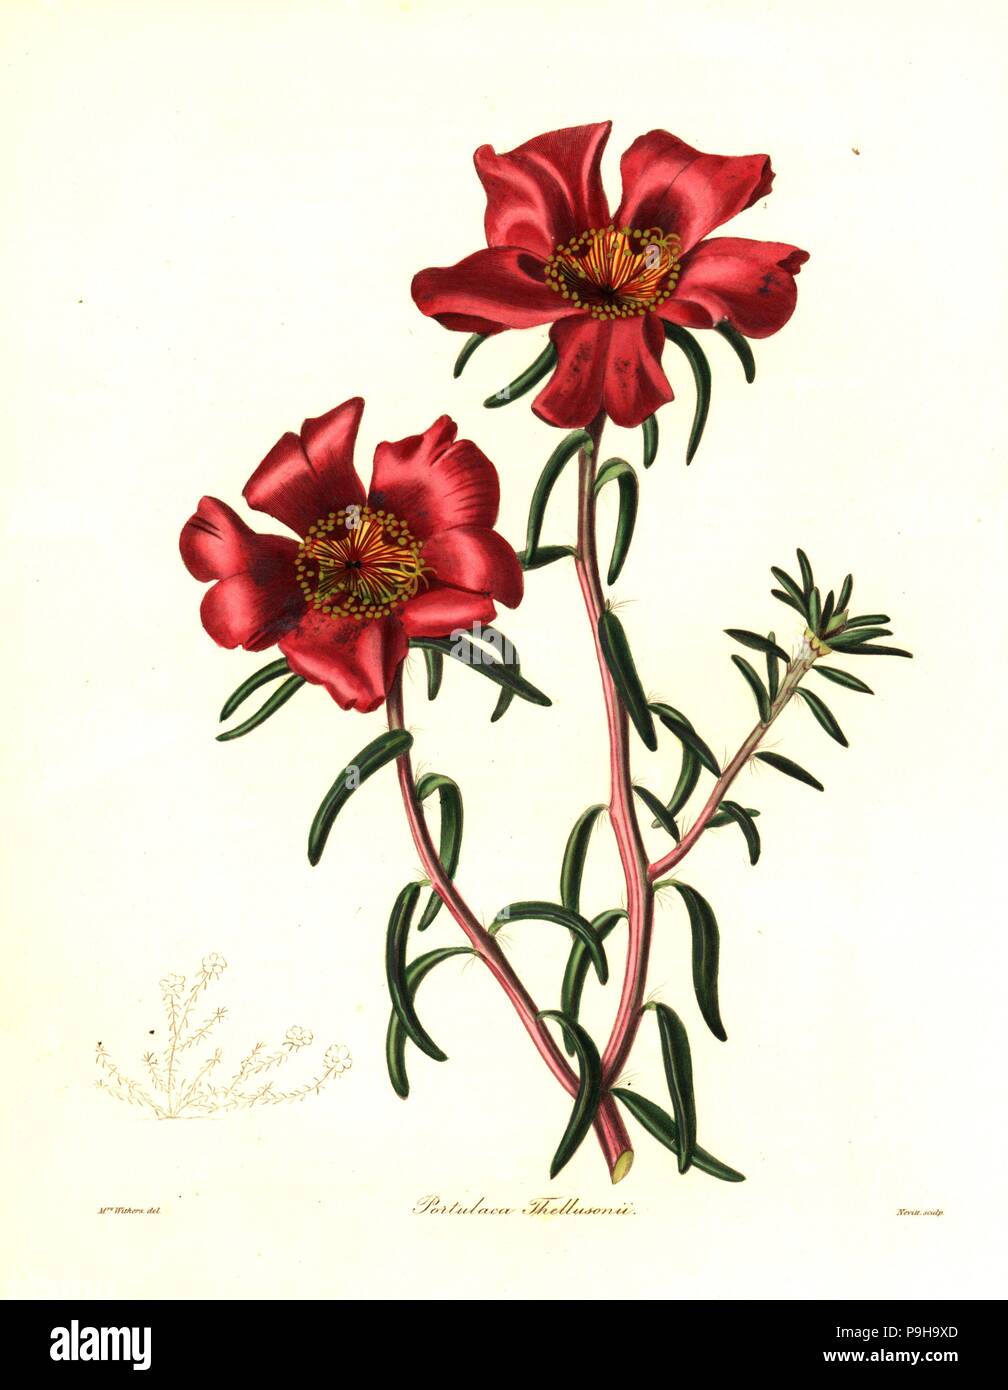 Thelluson's portulaca, Portulaca thellusonii. Handcoloured copperplate engraving by S. Nevitt after a botanical illustration by Mrs Augusta Withers from Benjamin Maund and the Rev. John Stevens Henslow's The Botanist, London, 1836. Stock Photo